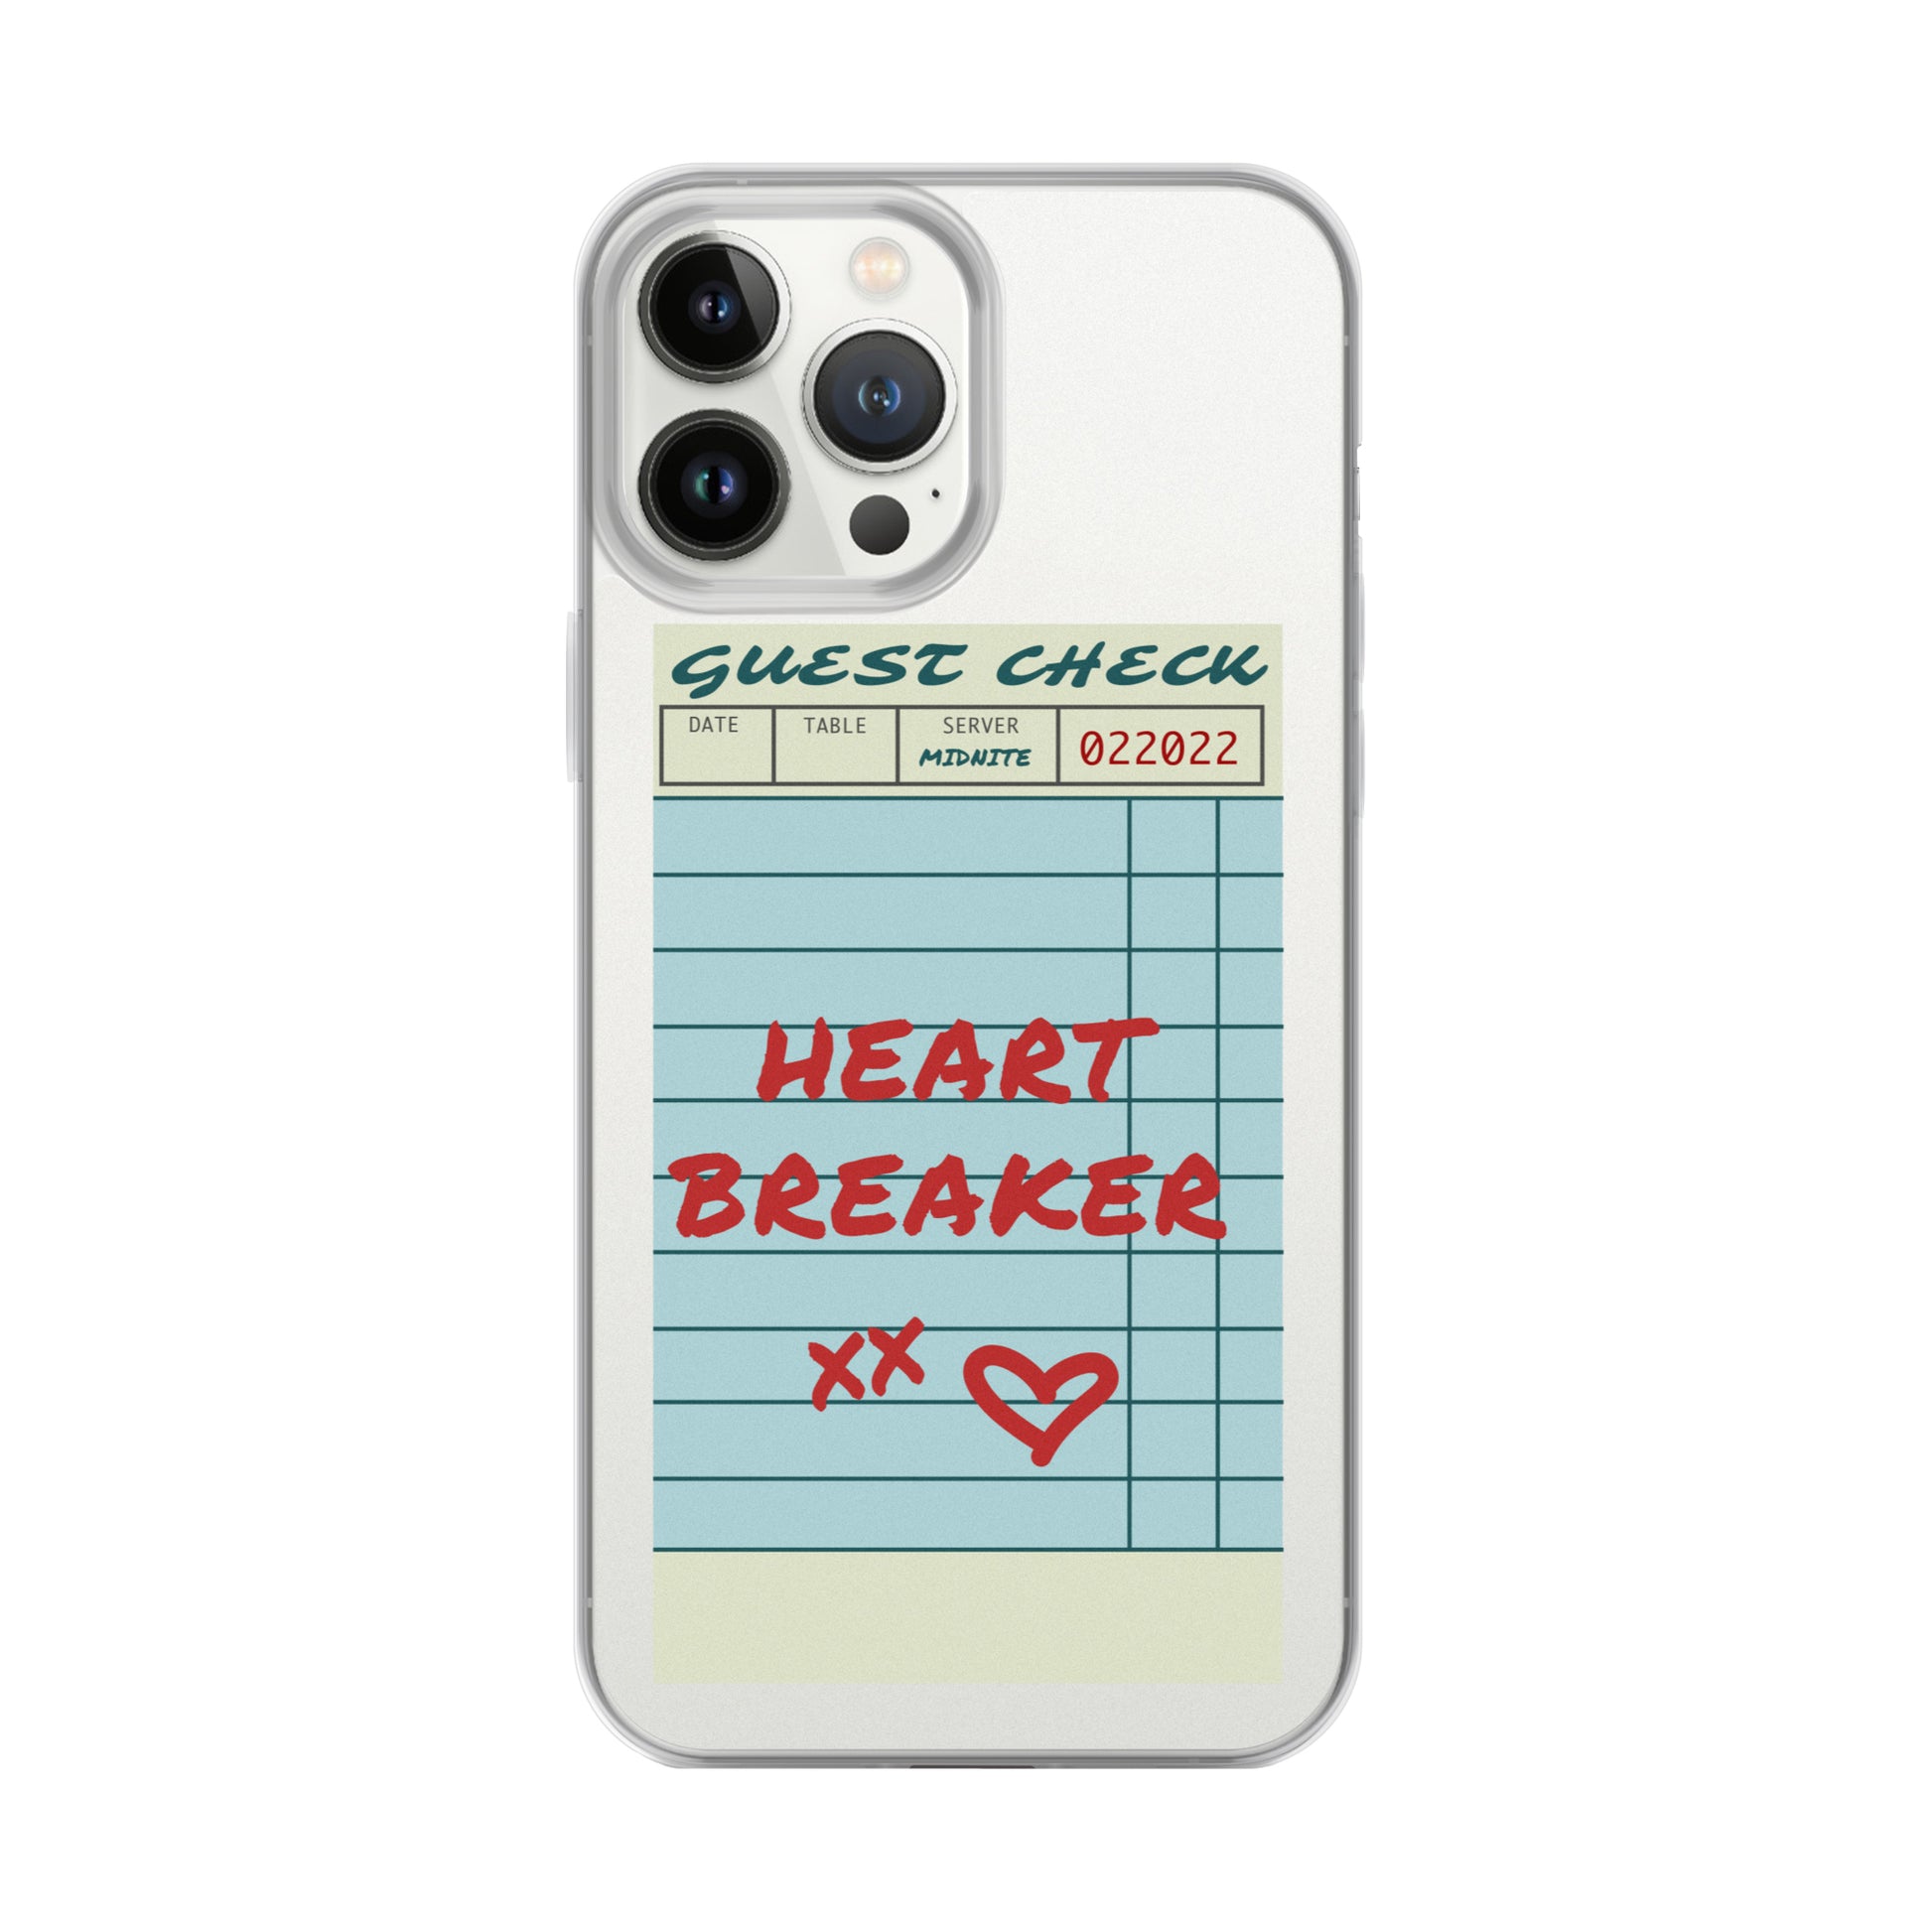 guest check, guest check print, iphone case, aesthetic iphone case, phone case